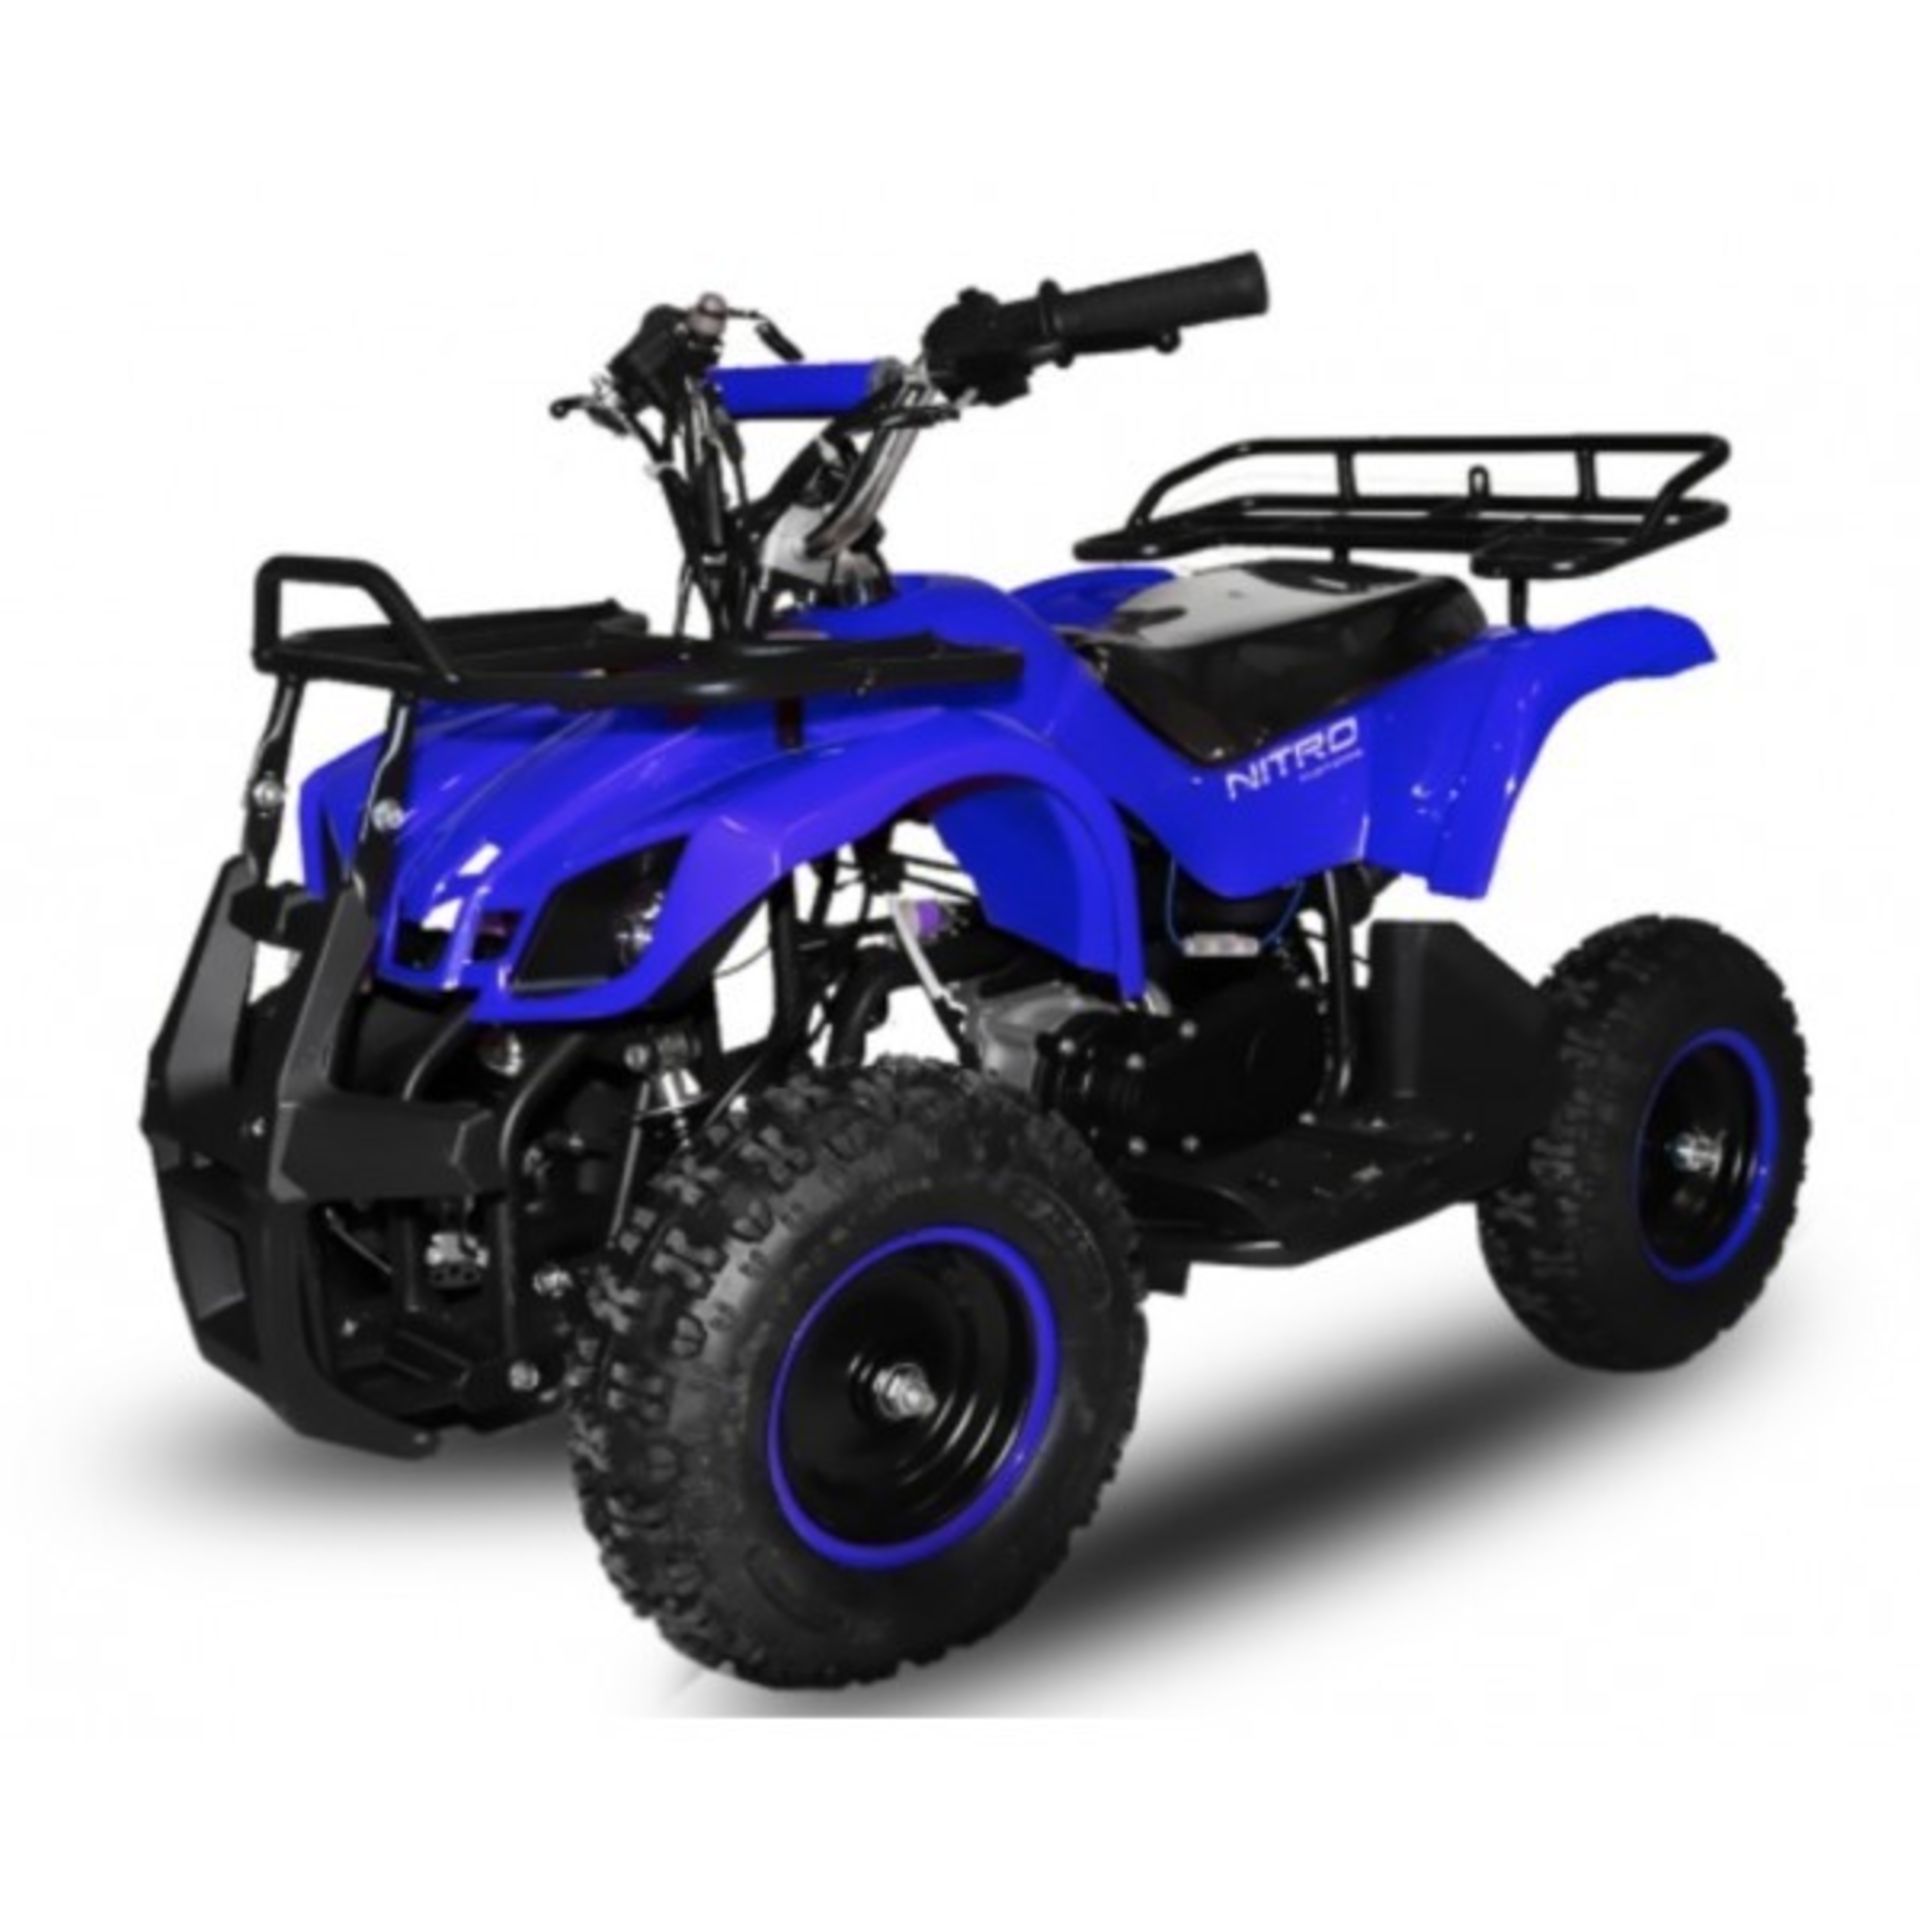 V Brand New 50cc Mini Quad Bike FRM - Colours May Vary - Front & Rear Frames - Picture May Vary From - Image 4 of 6